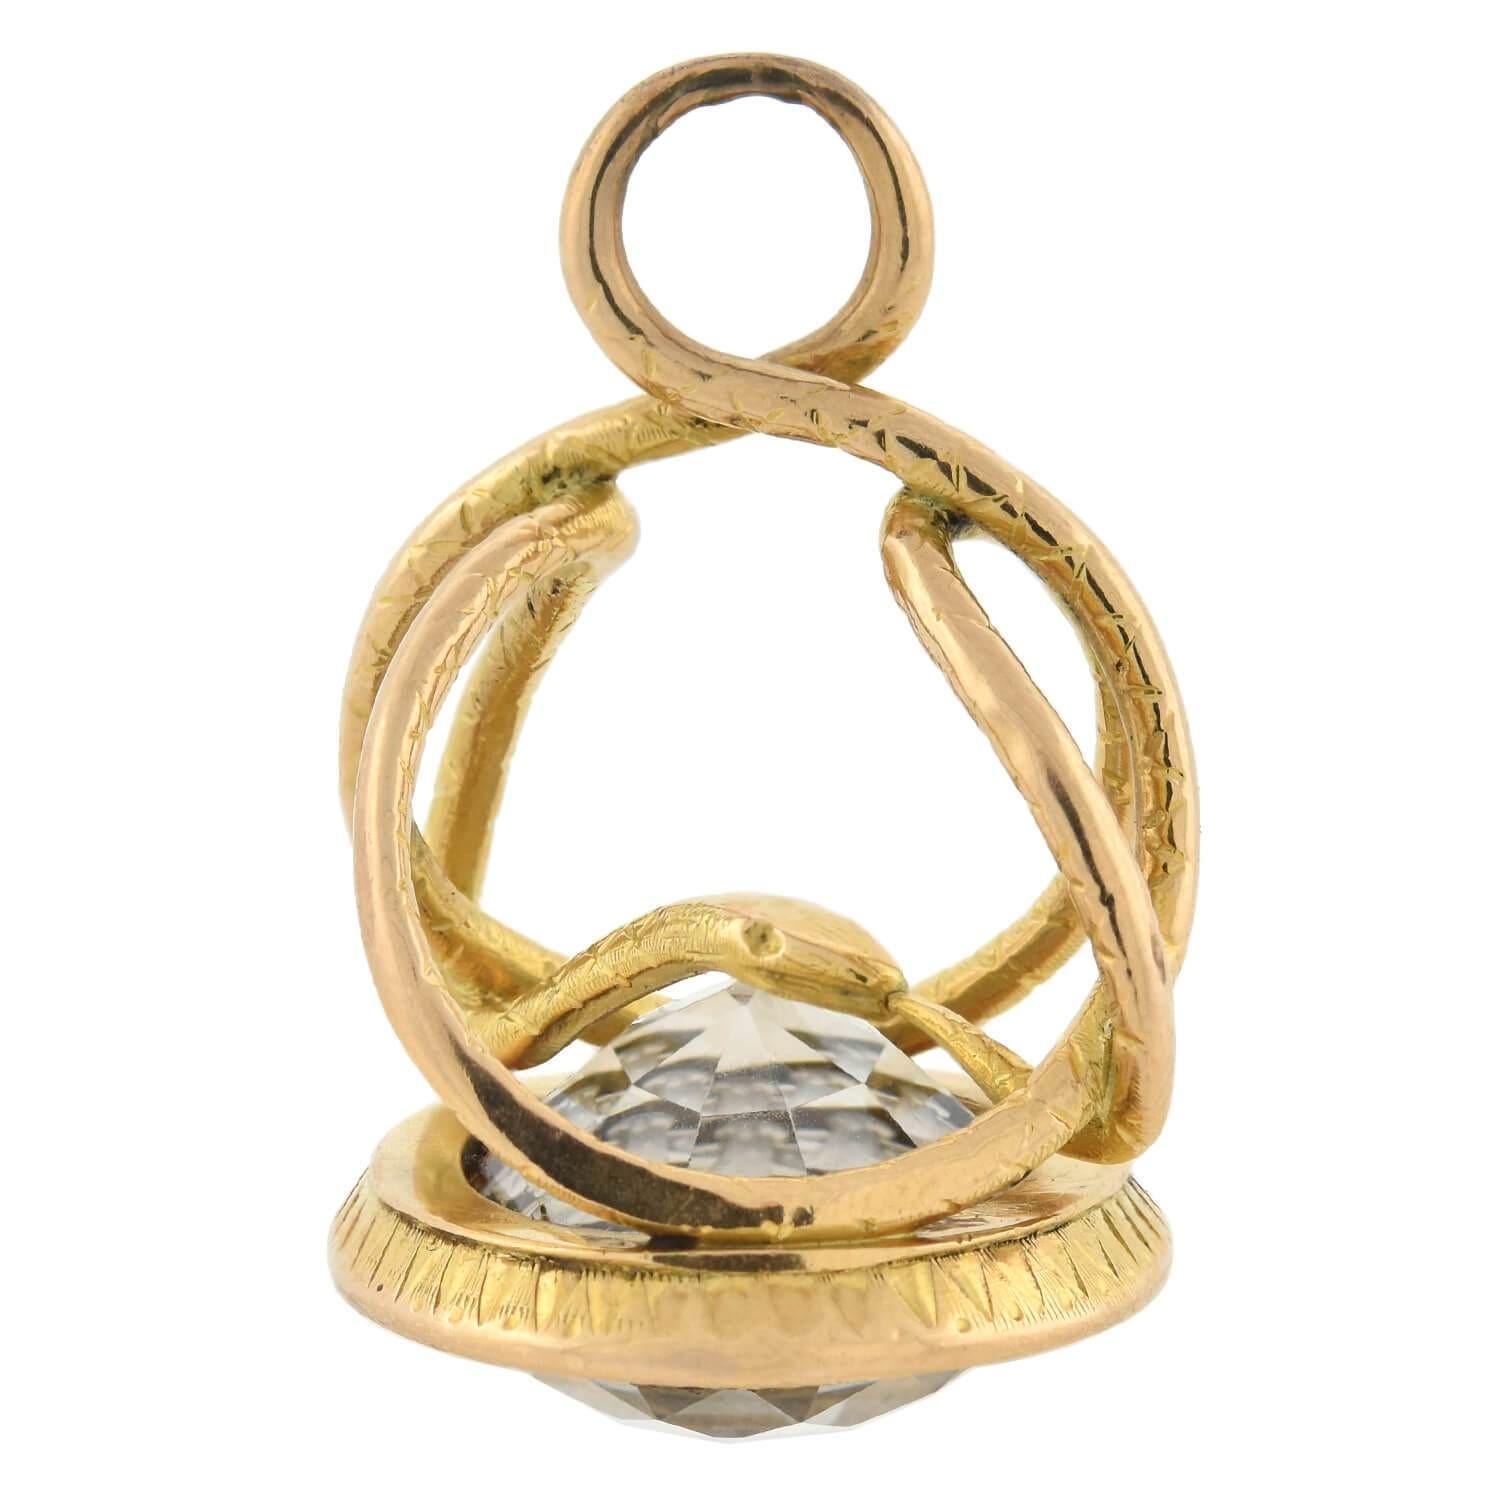 A fob is an adornment or a seal that hangs from the ribbon or chain of a pocket watch. Its purpose is to decorate or add weight to the watch chain itself making it easier for the watch to be withdrawn from a pocket. The base of the fob would often